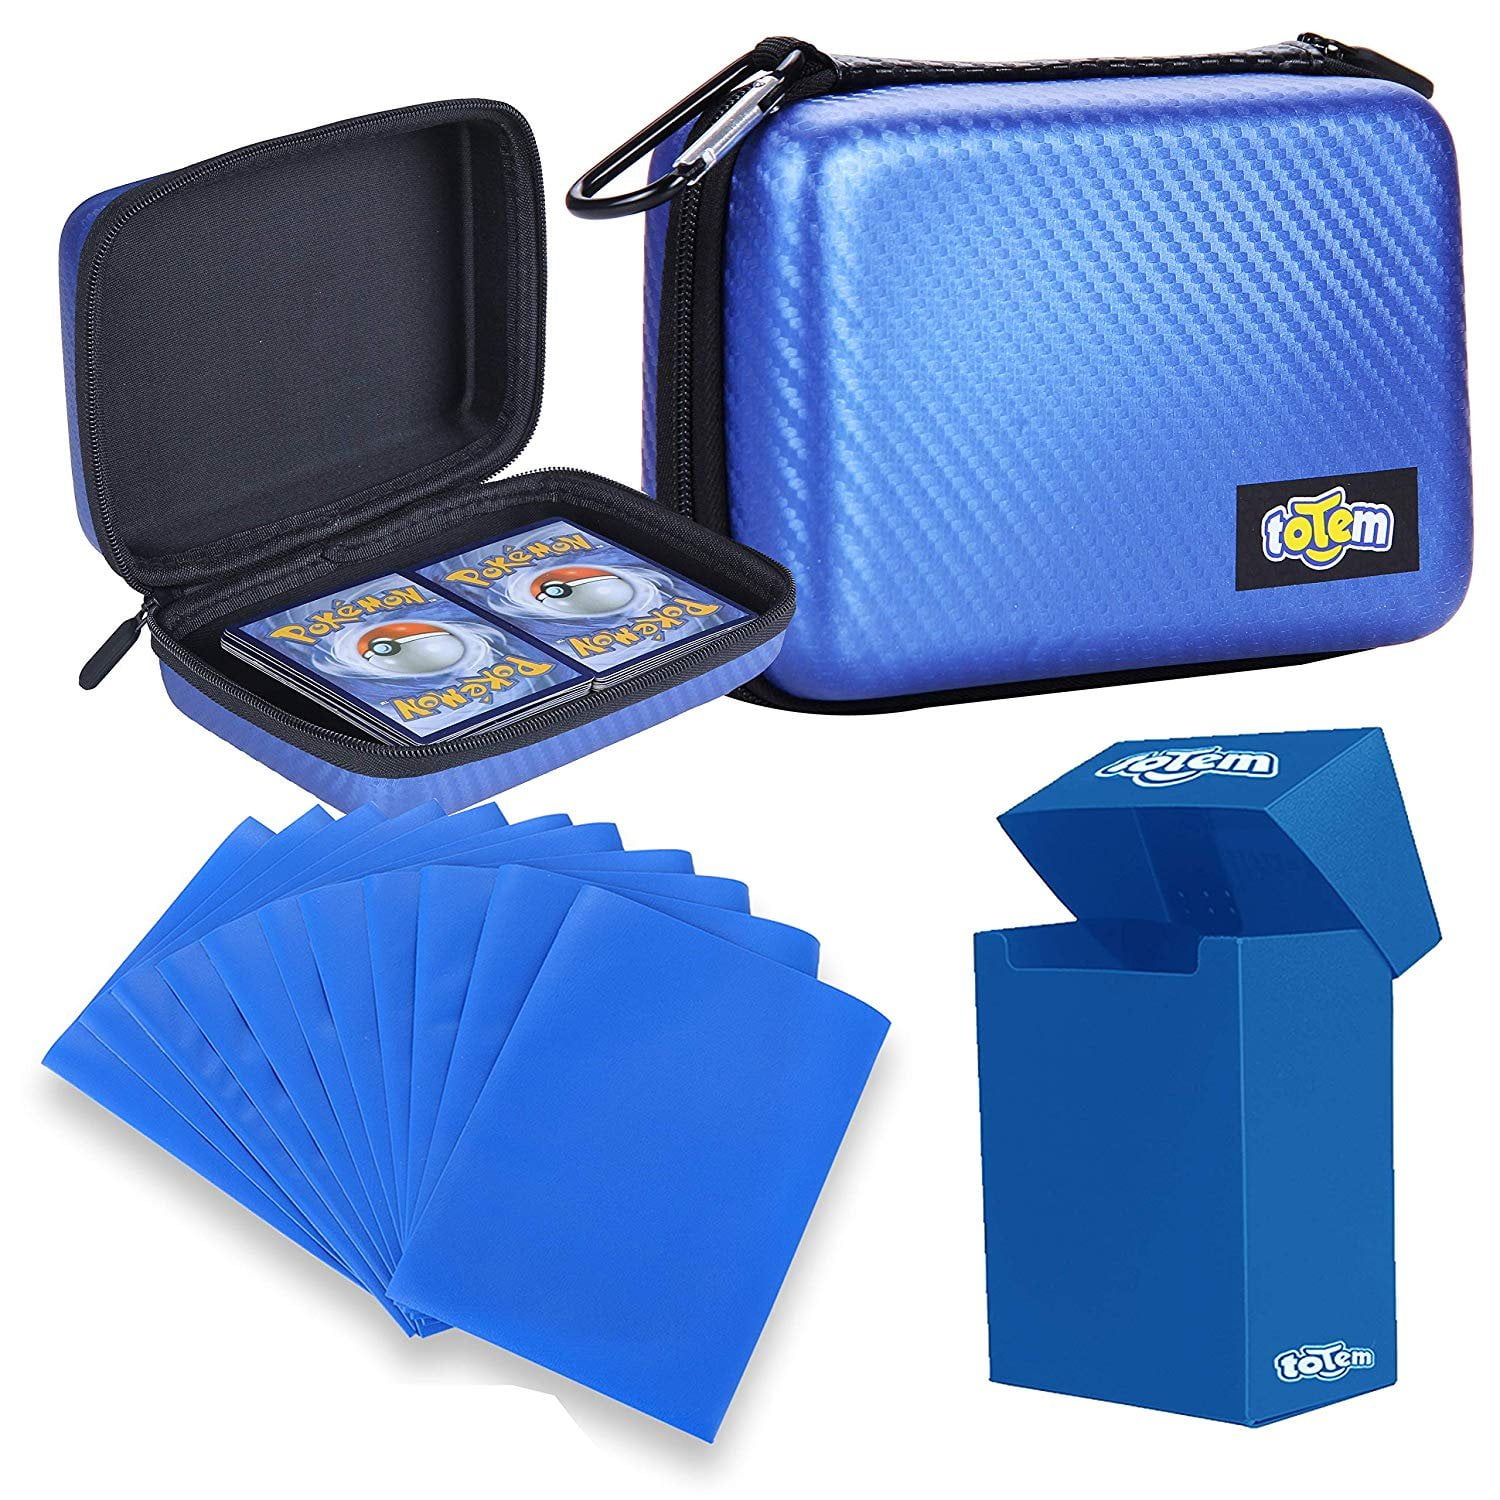 Totem World Card Case with Deck Box Protector and 100 Card Sleeves - Compatible with Pokemon, Yu-Gi-Oh, and Magic The Gathering Cards - Kid Safe Zipper Carrying Organizer - 500 Card Holder (Blue)